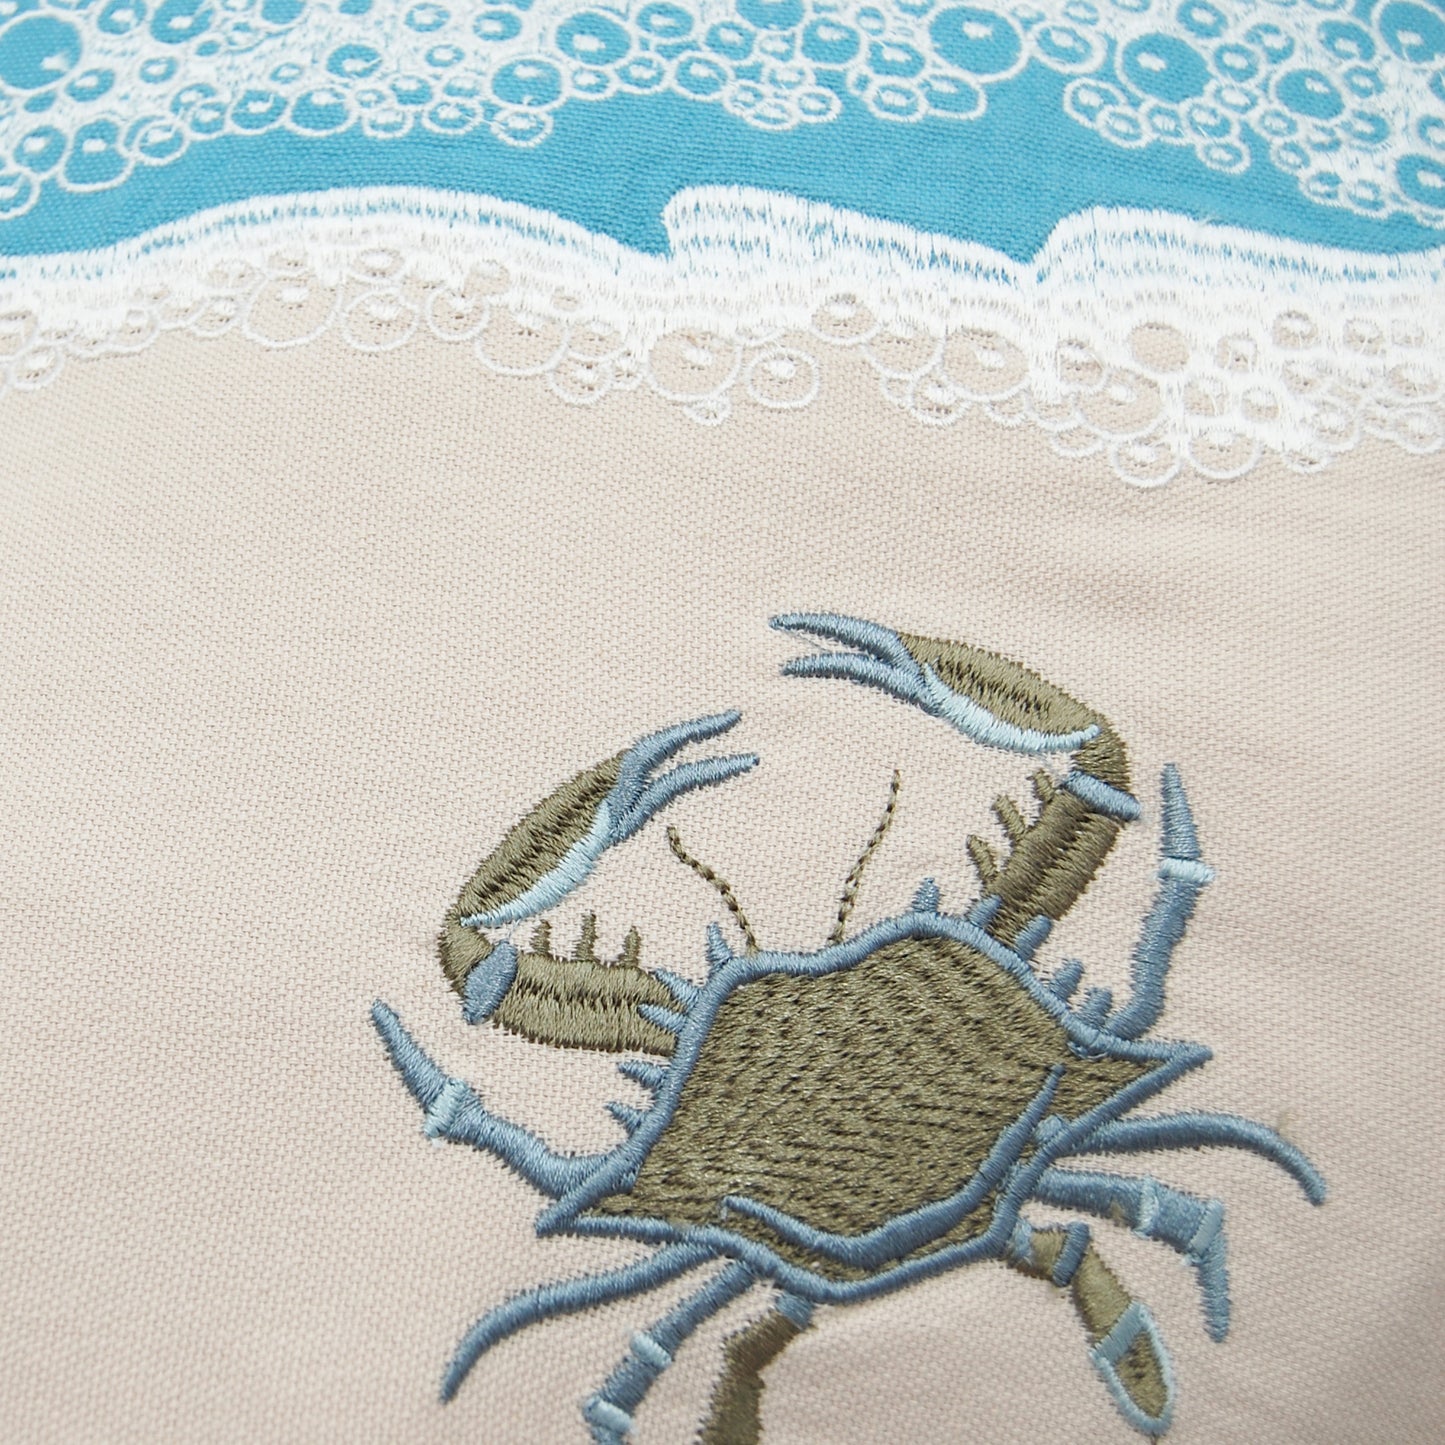 Detail shot of the Crab with Waves pillow embroidery.